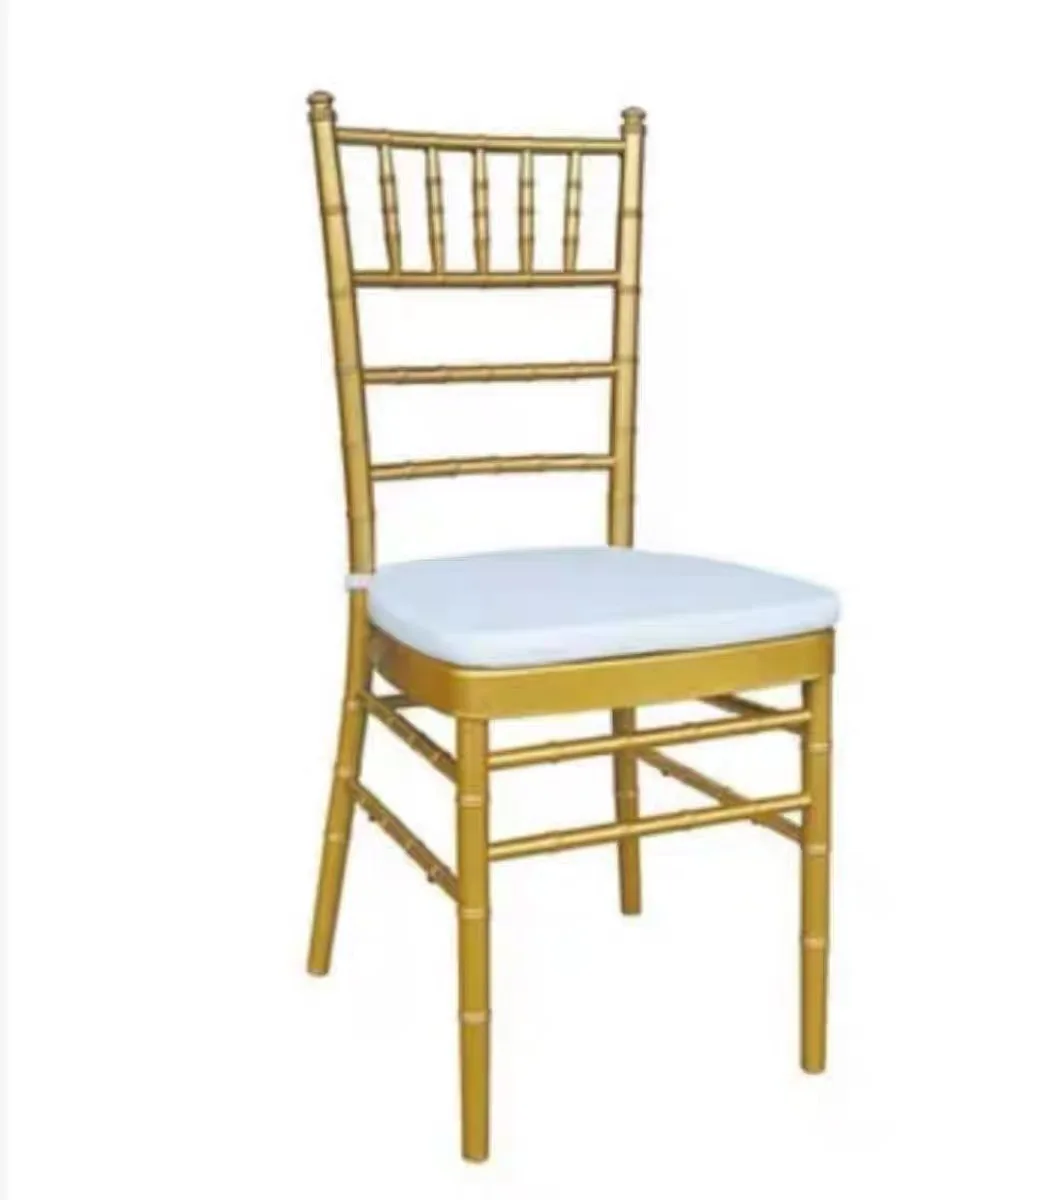 event party hotel banquet chair stackable gold stainless steel wholesale metal chavari tiffany wedding chairs with cushions